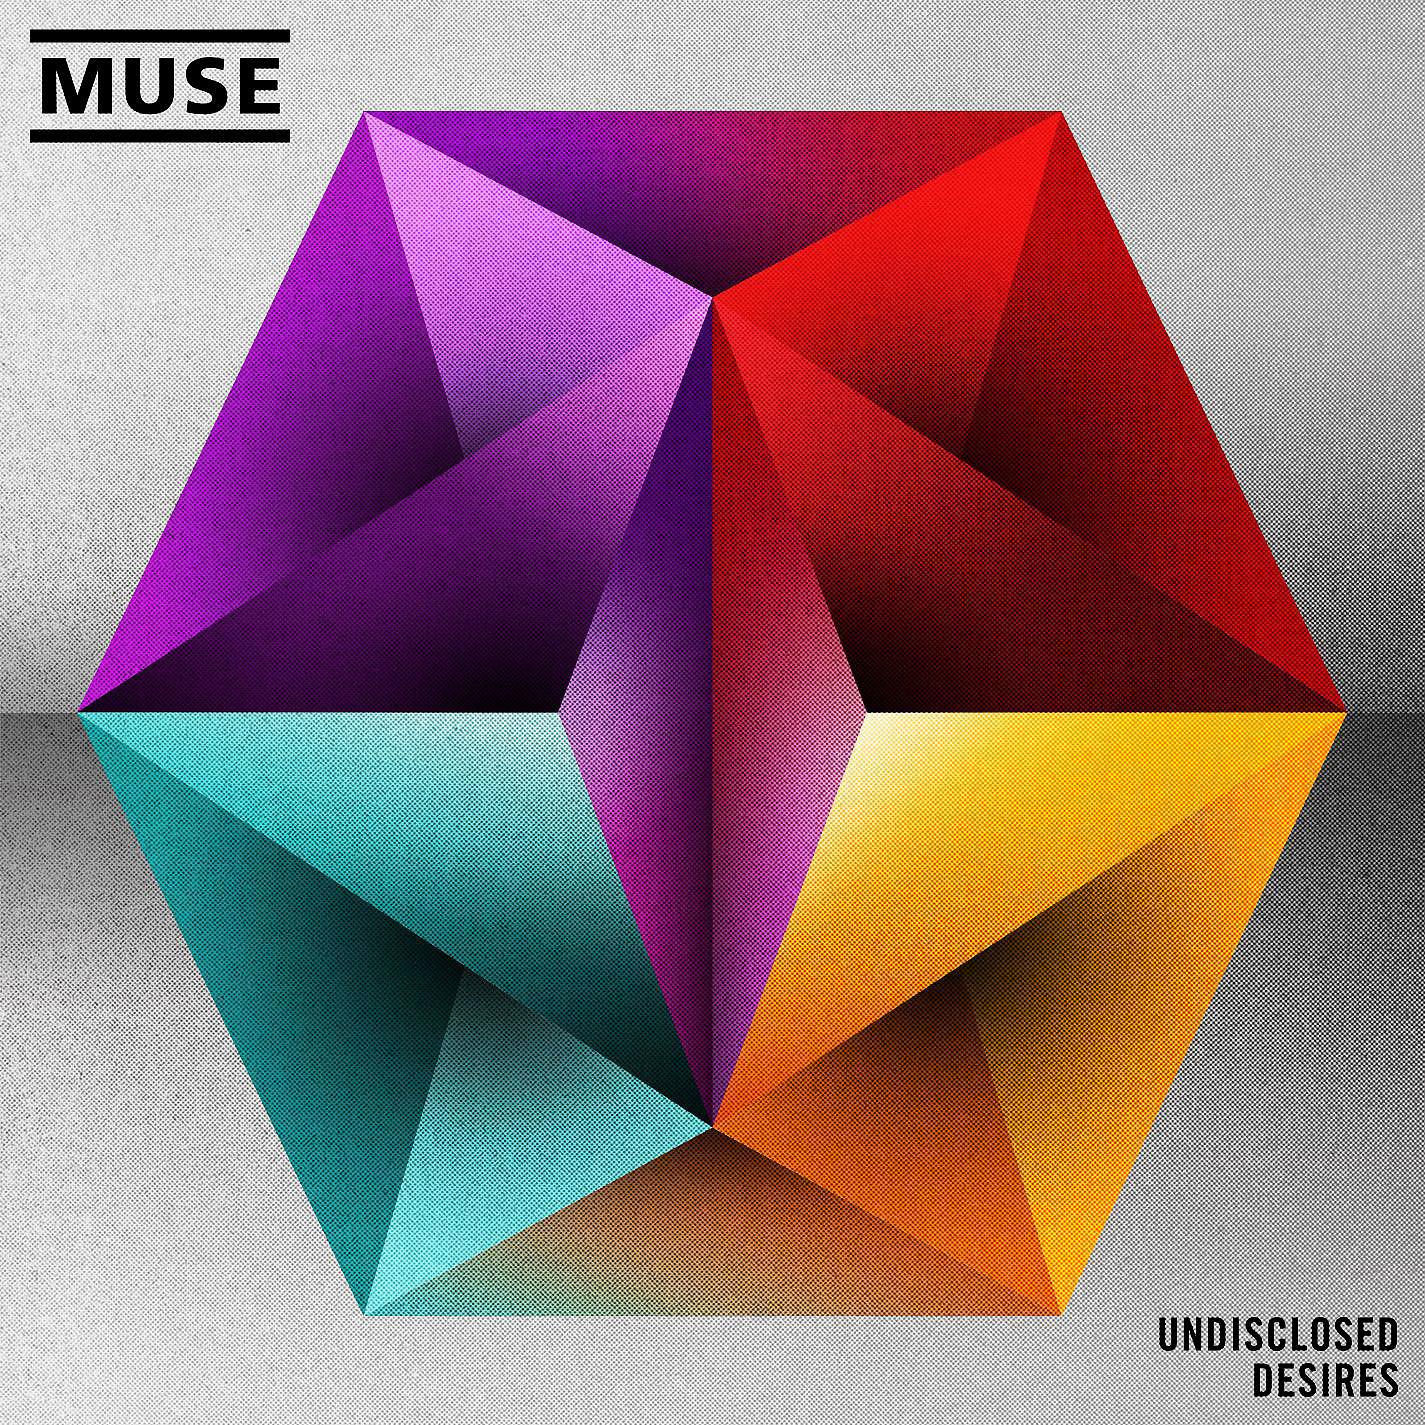 Muse undisclosed desires. Undisclosed Desires Muse. Muse обложка. Muse обложки альбомов. Muse Resistance обложка.